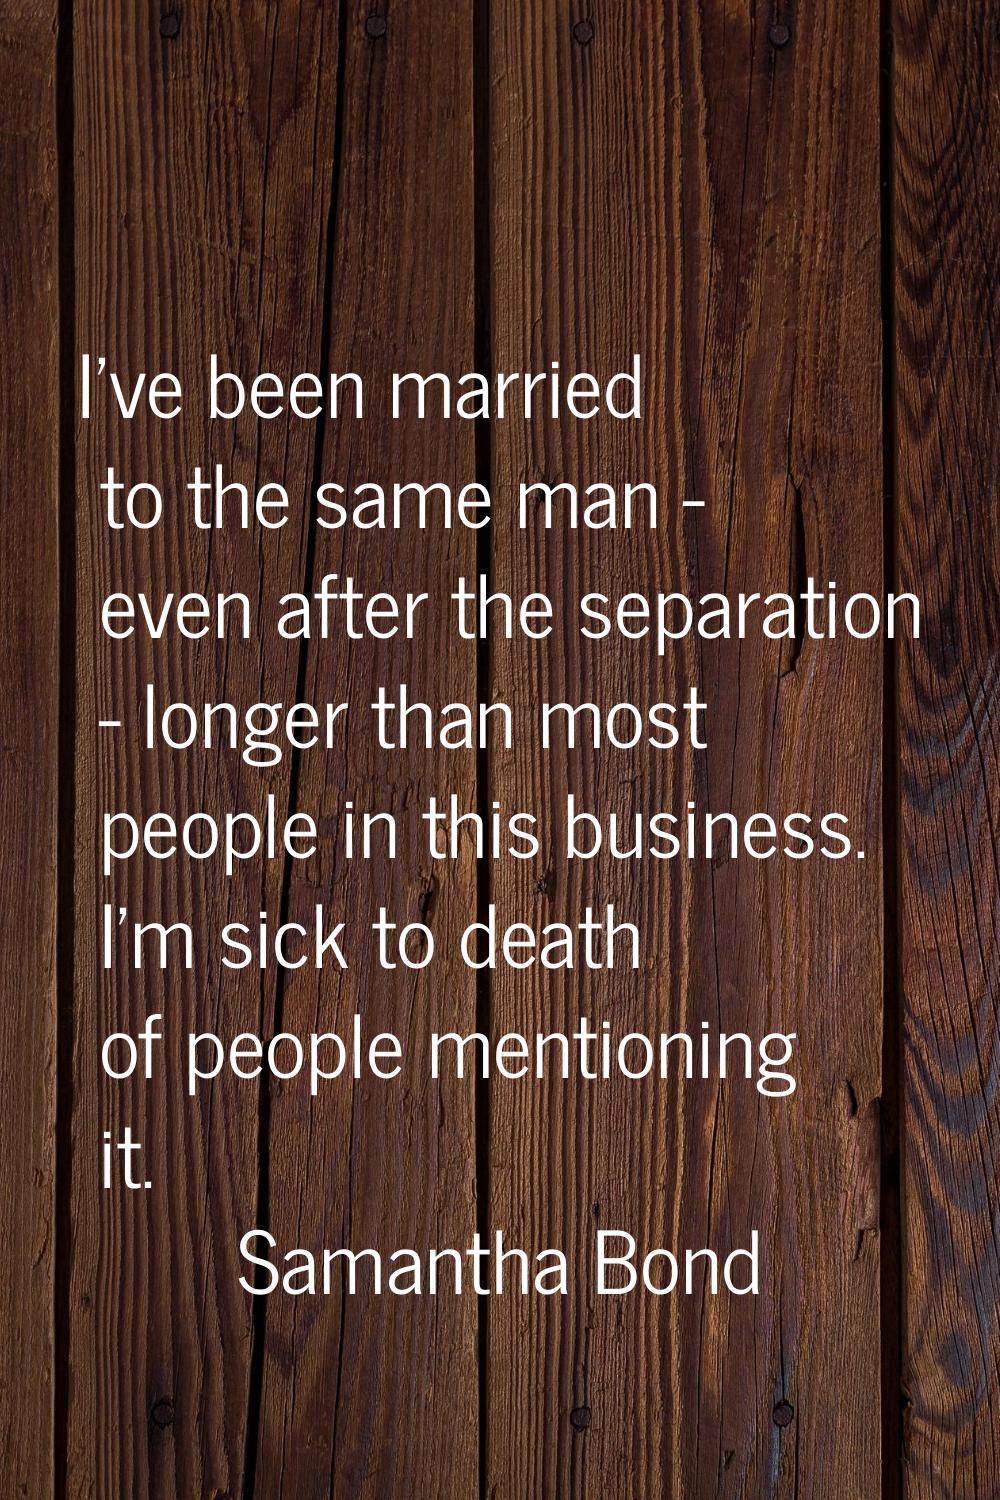 I've been married to the same man - even after the separation - longer than most people in this bus